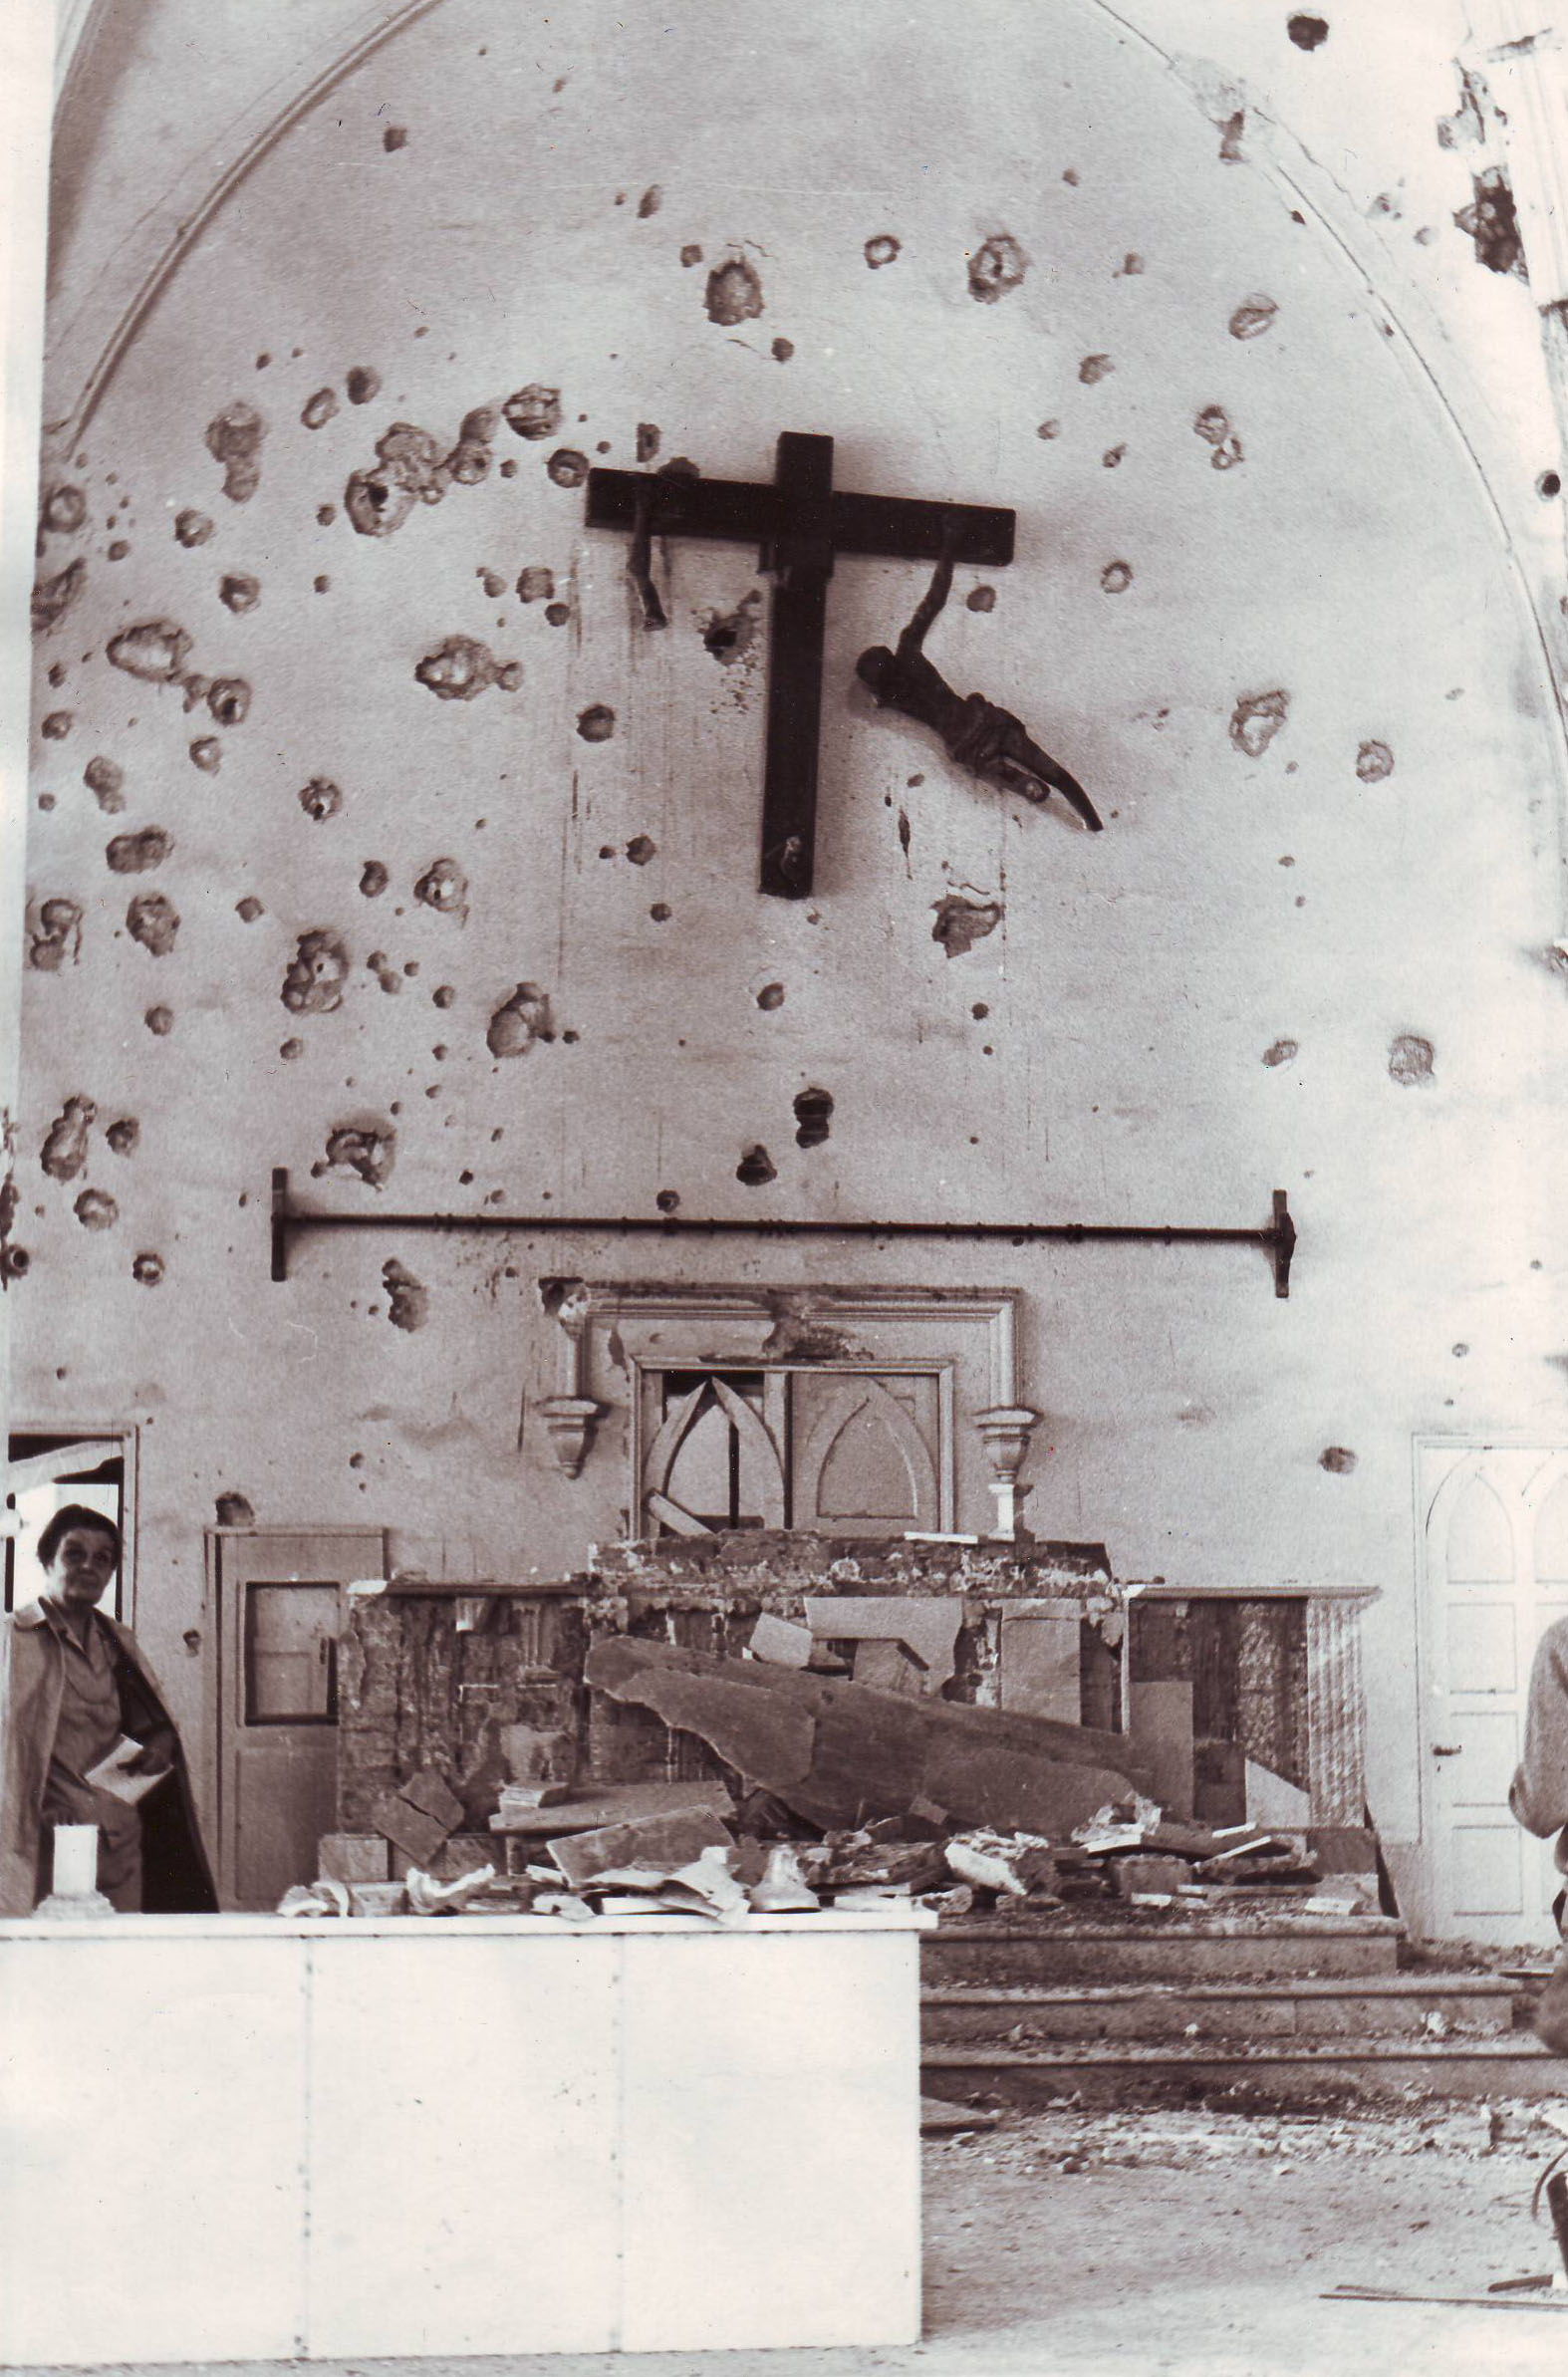 Clare looks into a battered church, likely during Bangladesh's war for independence in the early 1970s.